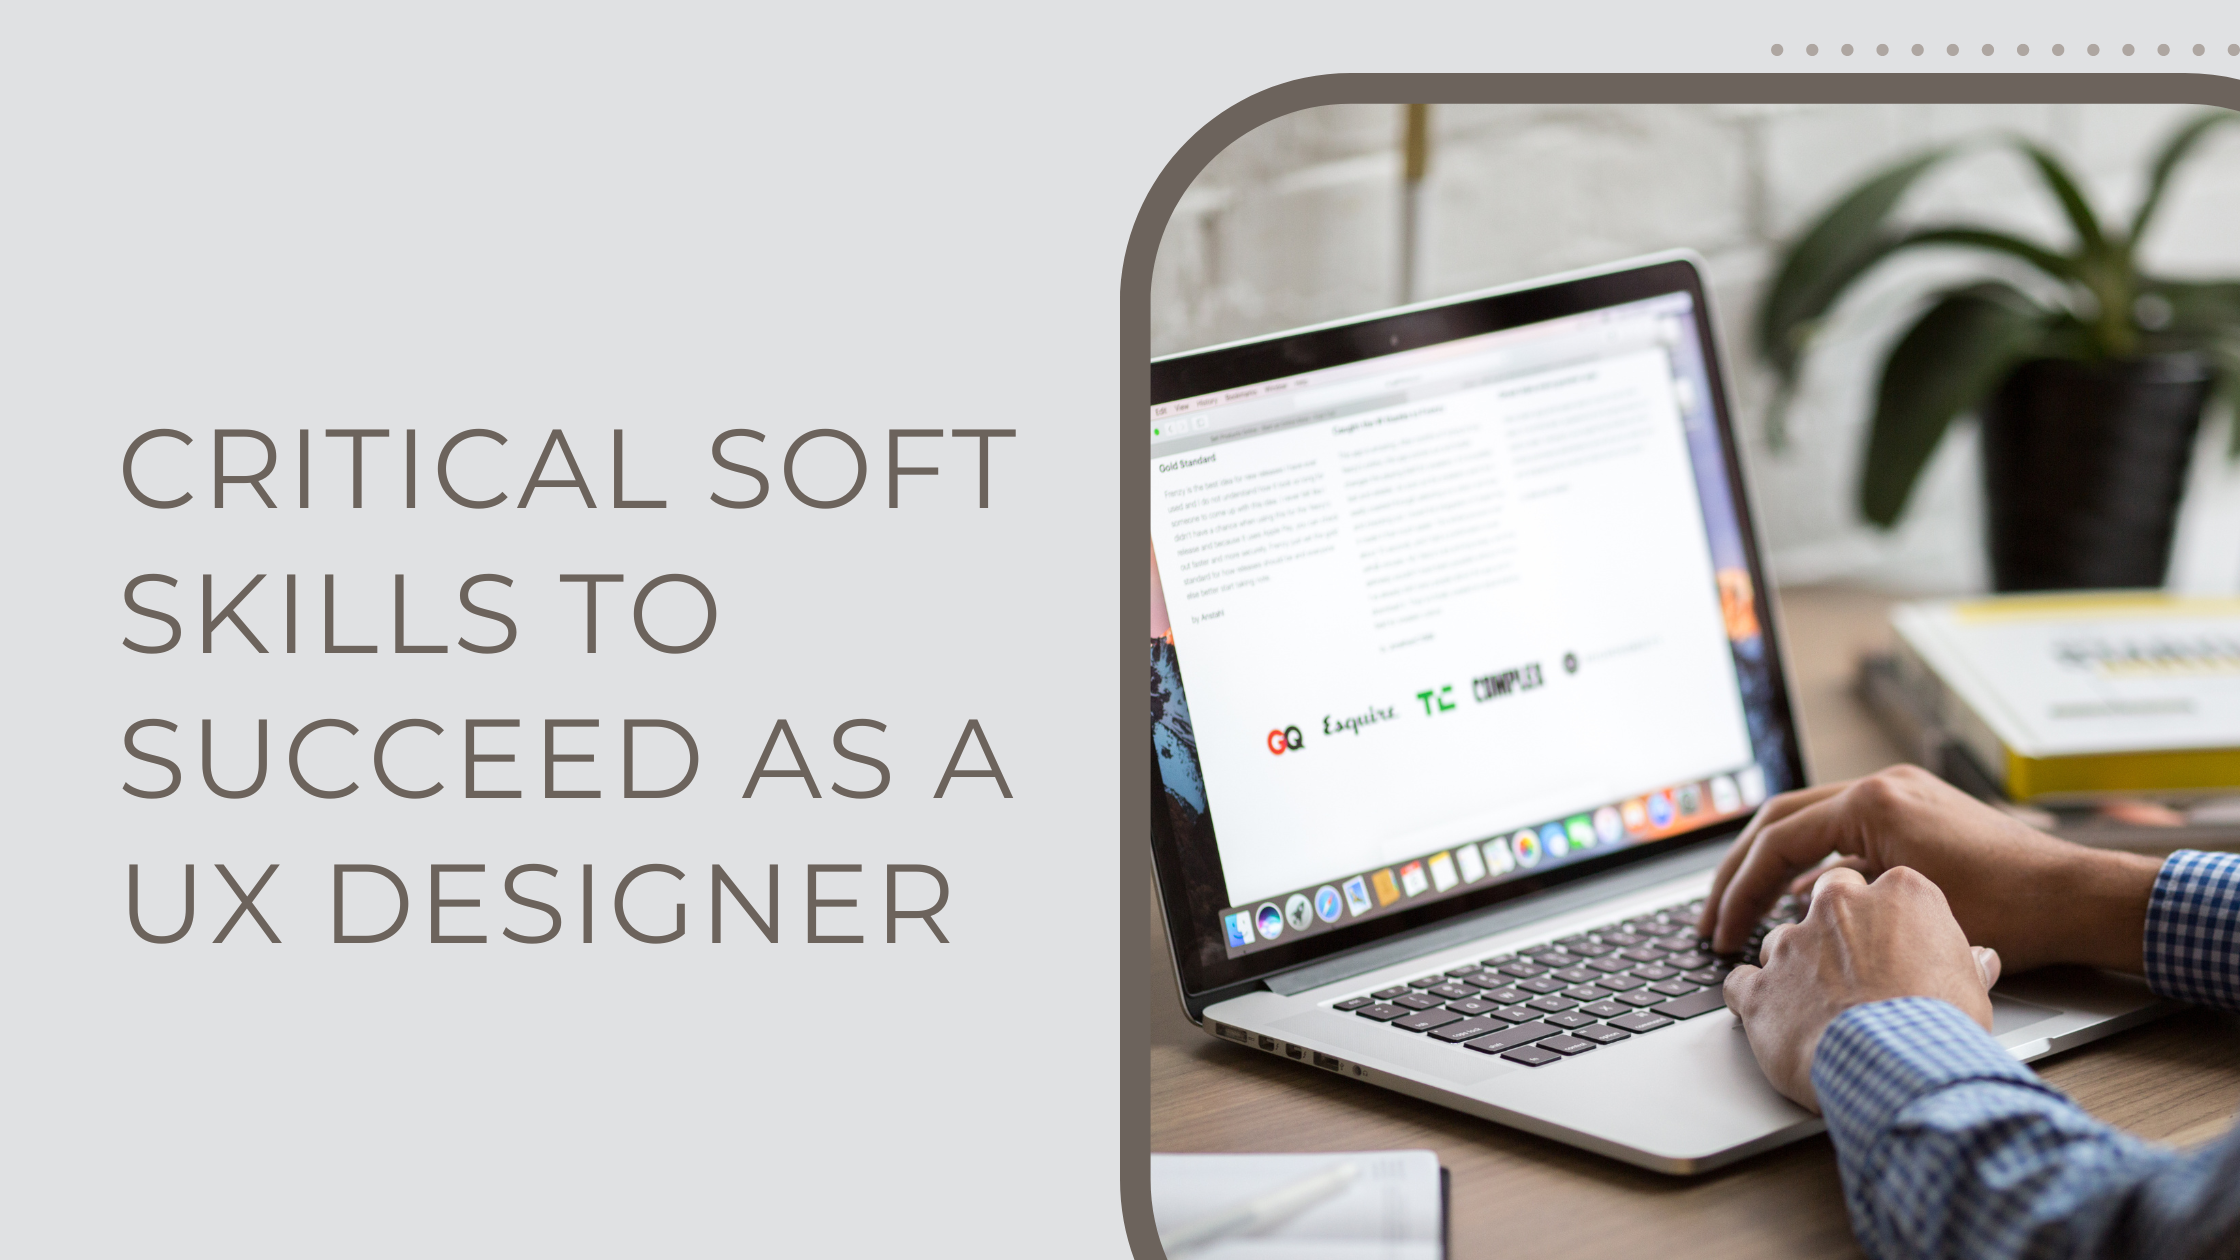 Critical Soft Skills to Succeed as a UX Designer